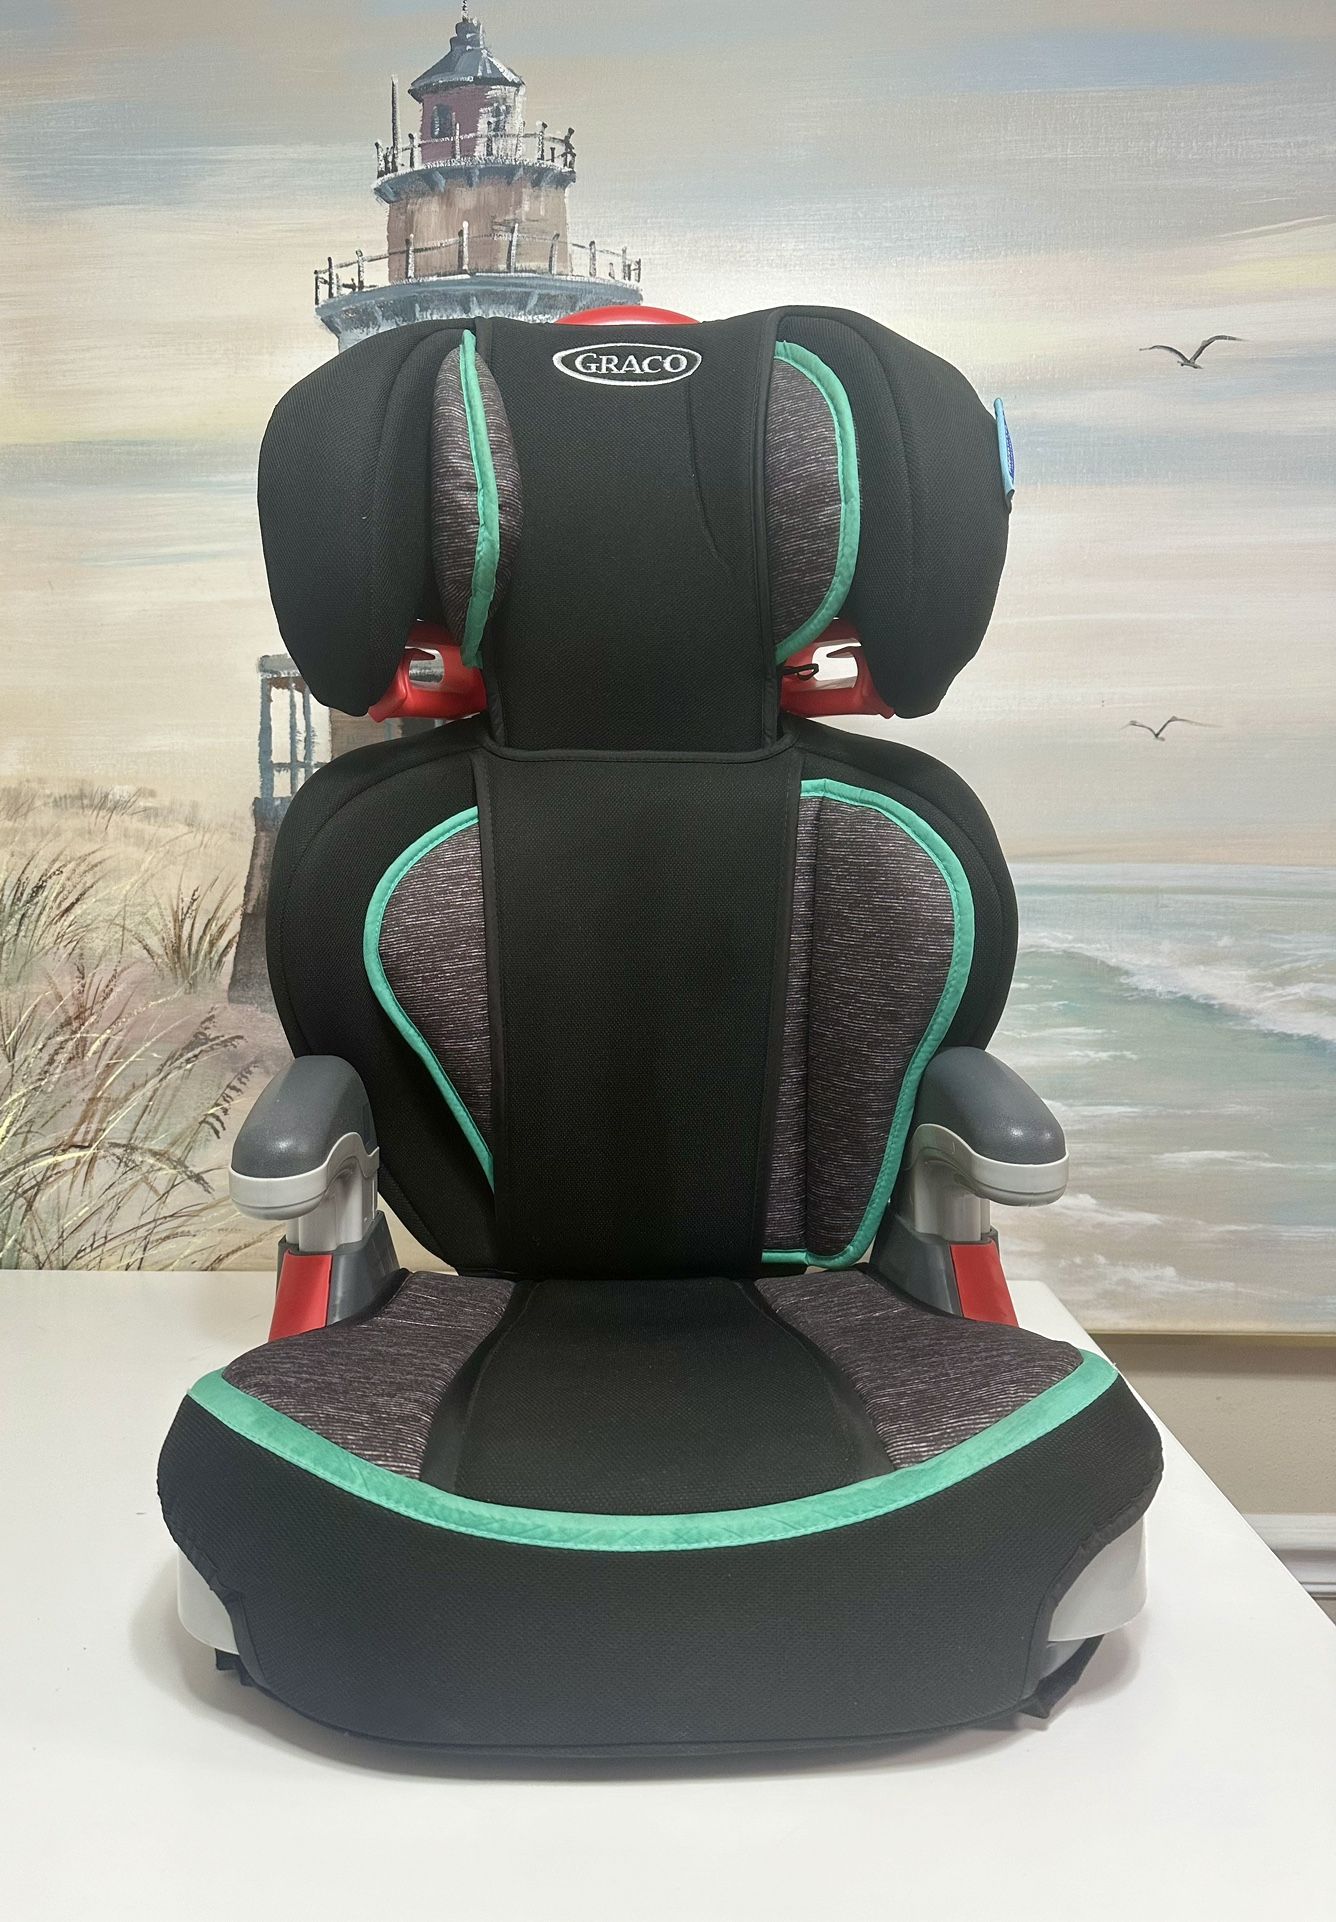 Grace Turbo Booster Car Seat